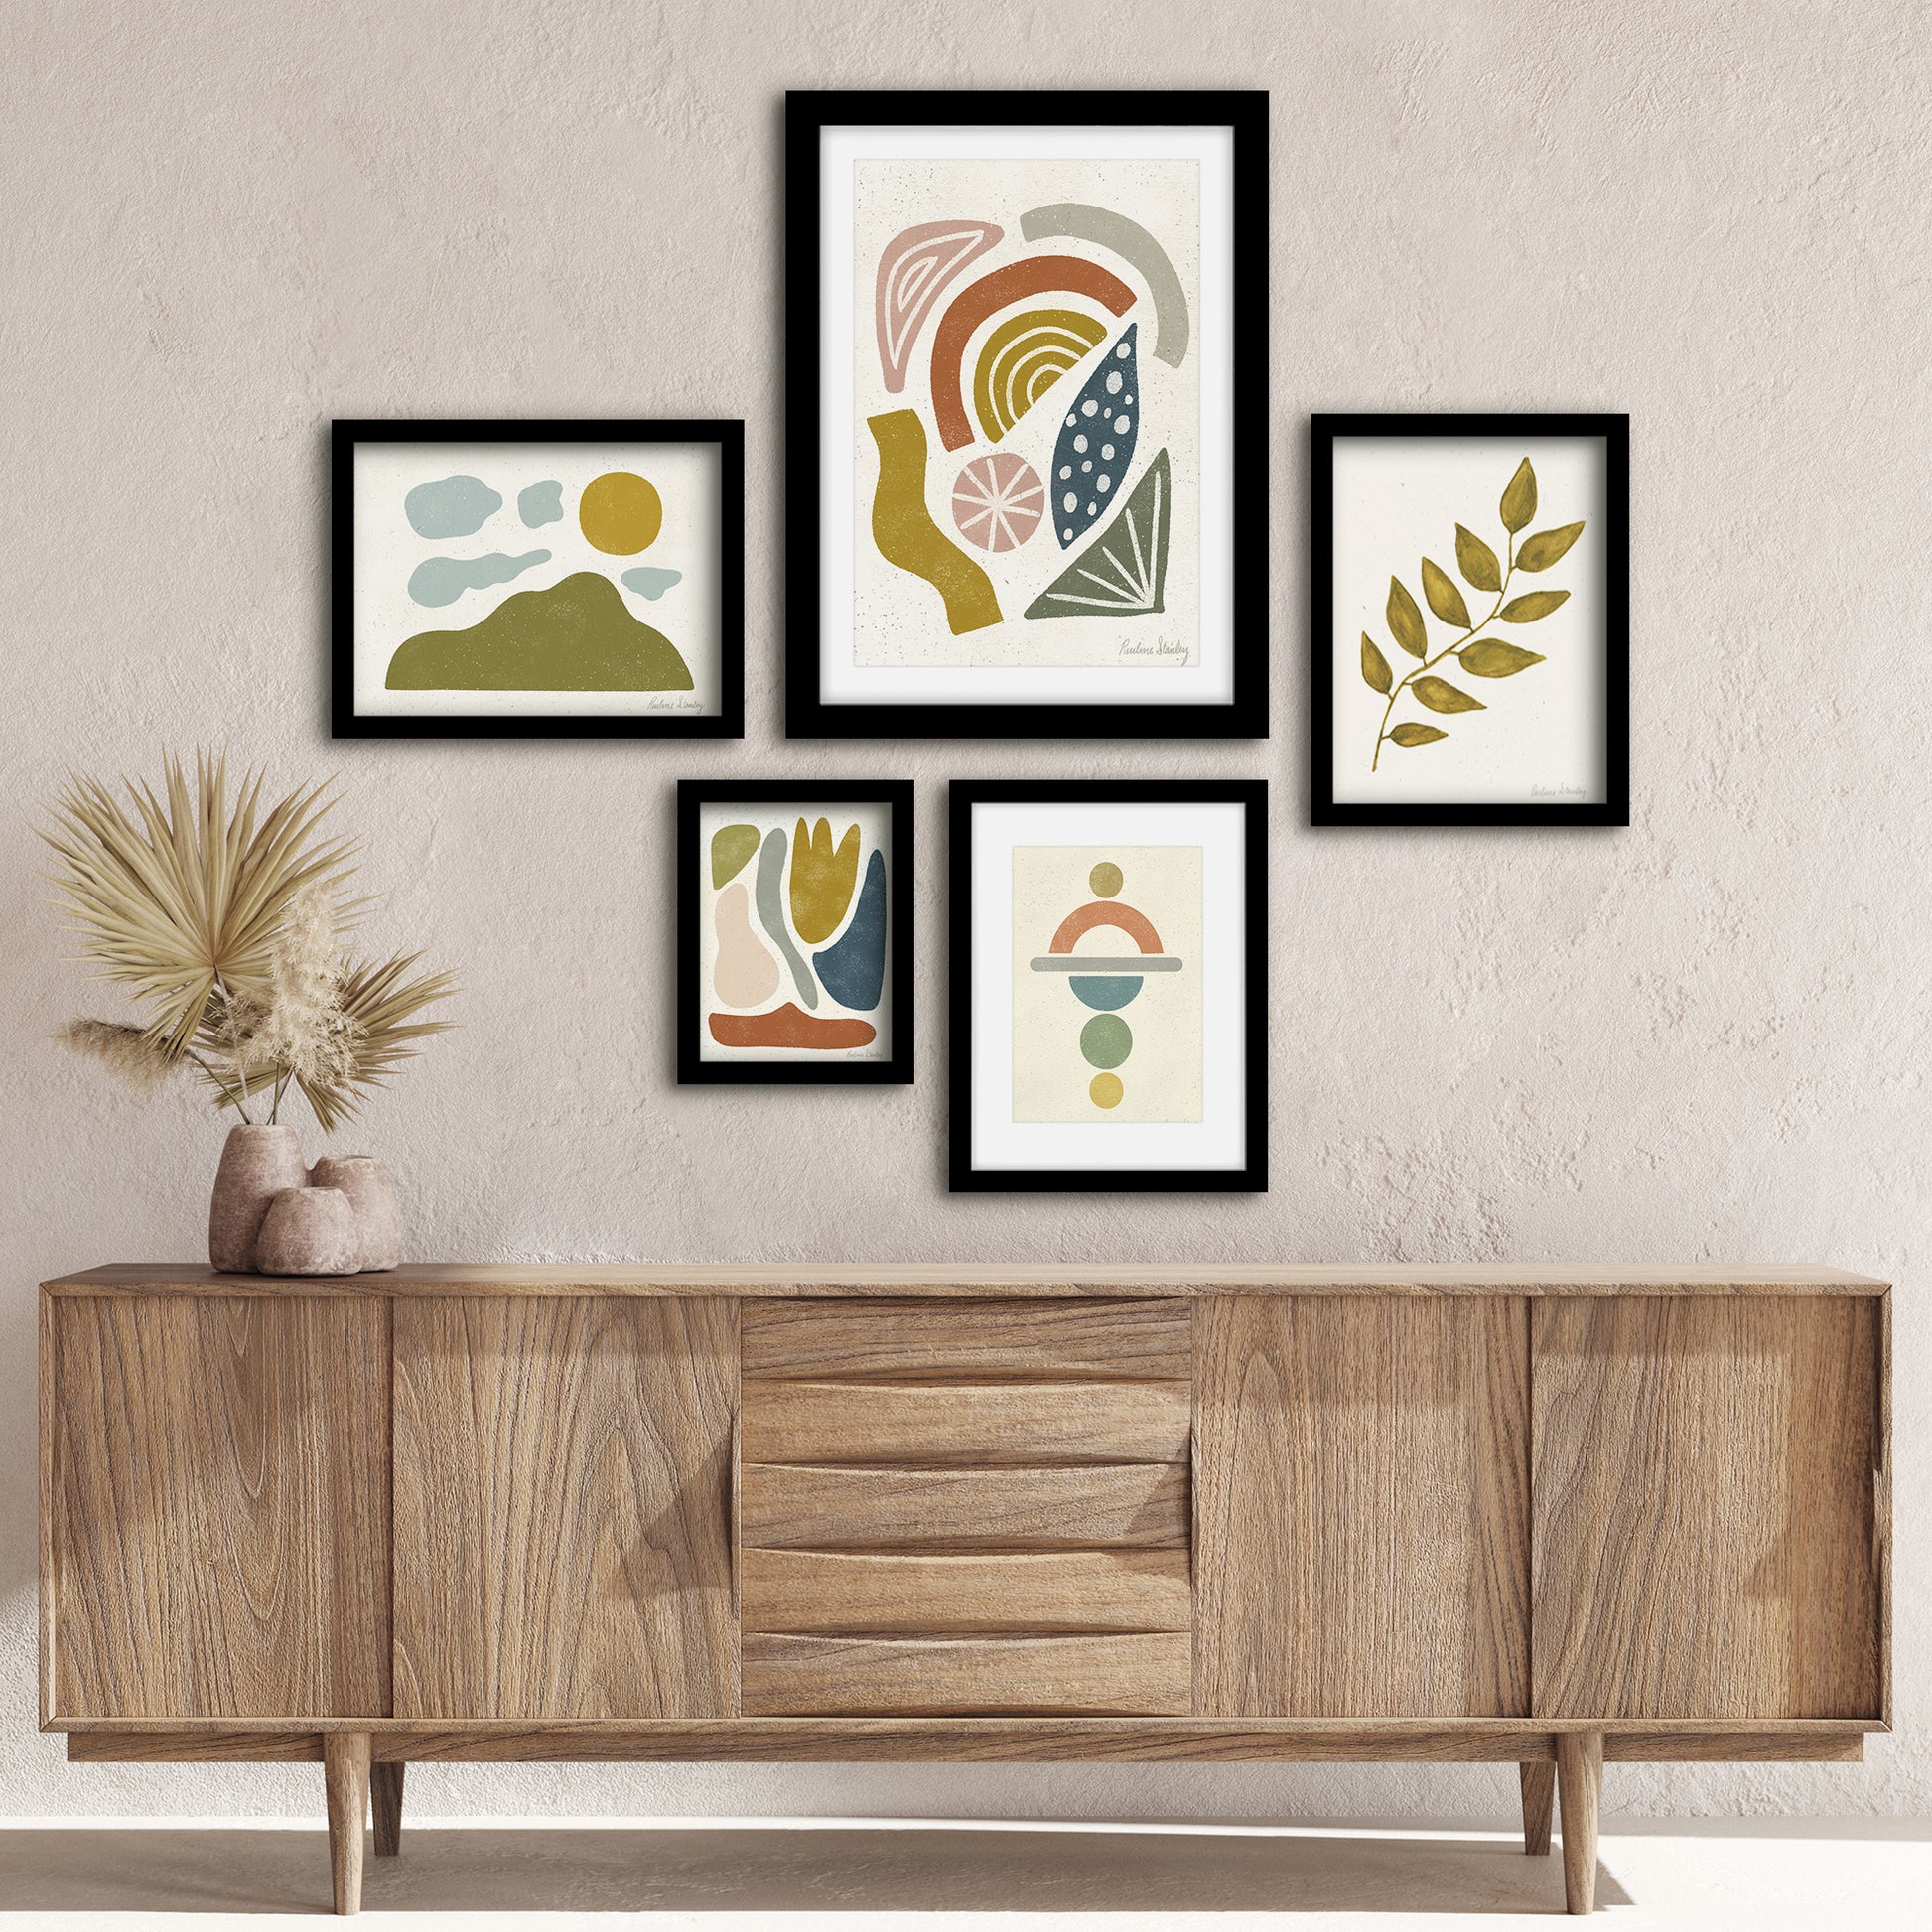 Americanflat 5 Piece Black Framed Gallery Wall Art Set - Colorful Shapes Green Organic Nature